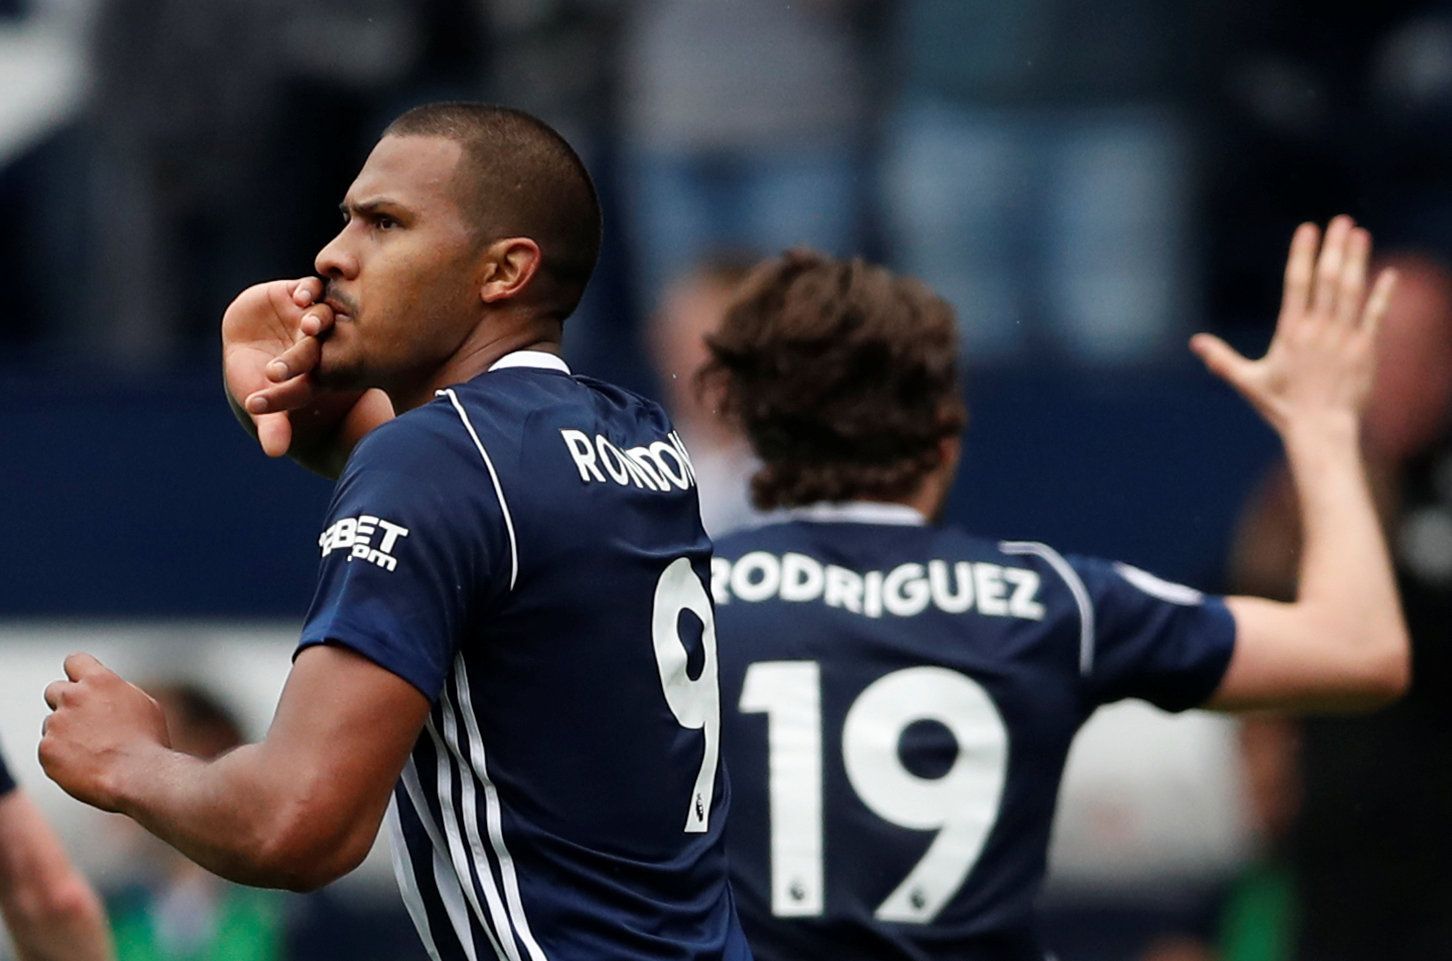 Soccer Football - Premier League - West Bromwich Albion v Liverpool - The Hawthorns, West Bromwich, Britain - April 21, 2018   West Bromwich Albion's Salomon Rondon celebrates scoring their second goal                            Action Images via Reuters/Andrew Boyers    EDITORIAL USE ONLY. No use with unauthorized audio, video, data, fixture lists, club/league logos or 